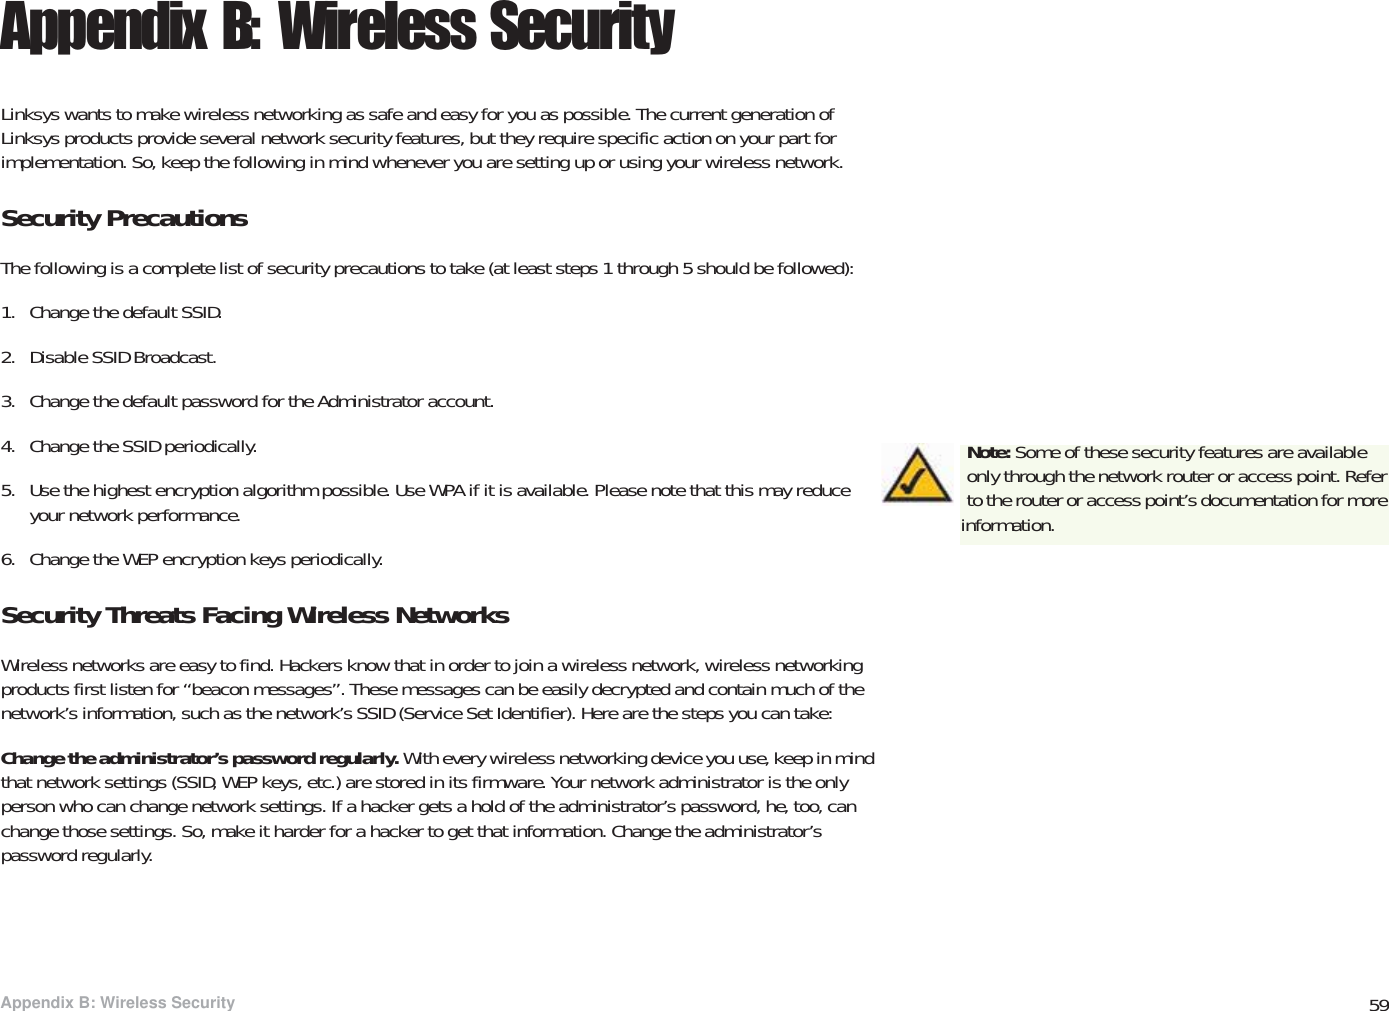 59Appendix B: Wireless SecuritySecurity PrecautionsWireless-G PTZ Internet Video Camera with AudioAppendix B: Wireless SecurityLinksys wants to make wireless networking as safe and easy for you as possible. The current generation of Linksys products provide several network security features, but they require specific action on your part for implementation. So, keep the following in mind whenever you are setting up or using your wireless network.Security PrecautionsThe following is a complete list of security precautions to take (at least steps 1 through 5 should be followed):1. Change the default SSID. 2. Disable SSID Broadcast. 3. Change the default password for the Administrator account. 4. Change the SSID periodically. 5. Use the highest encryption algorithm possible. Use WPA if it is available. Please note that this may reduce your network performance. 6. Change the WEP encryption keys periodically. Security Threats Facing Wireless Networks Wireless networks are easy to find. Hackers know that in order to join a wireless network, wireless networking products first listen for “beacon messages”. These messages can be easily decrypted and contain much of the network’s information, such as the network’s SSID (Service Set Identifier). Here are the steps you can take:Change the administrator’s password regularly. With every wireless networking device you use, keep in mind that network settings (SSID, WEP keys, etc.) are stored in its firmware. Your network administrator is the only person who can change network settings. If a hacker gets a hold of the administrator’s password, he, too, can change those settings. So, make it harder for a hacker to get that information. Change the administrator’s password regularly.Note: Some of these security features are available only through the network router or access point. Refer to the router or access point’s documentation for more information.